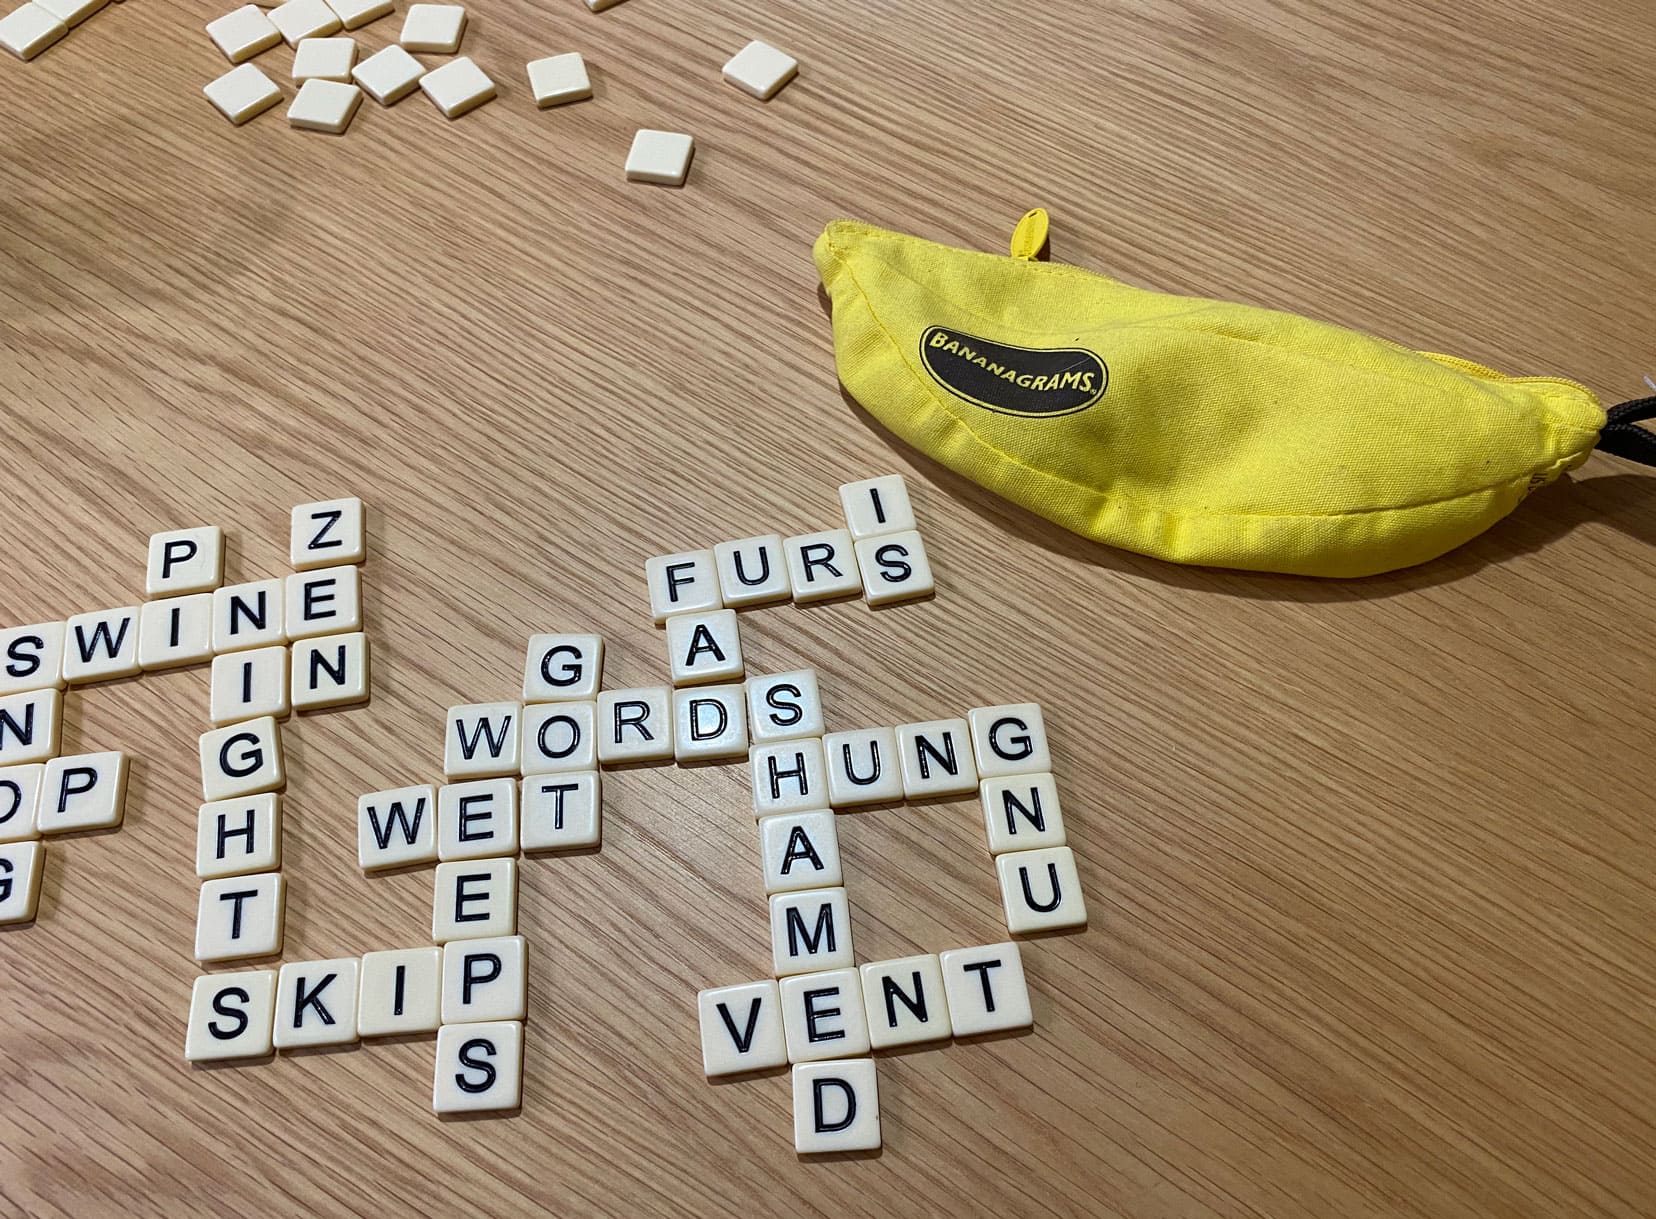 Our game of bananagrams - with letter tiles forming words linking together much like a crossword and the banana shaped cloth container